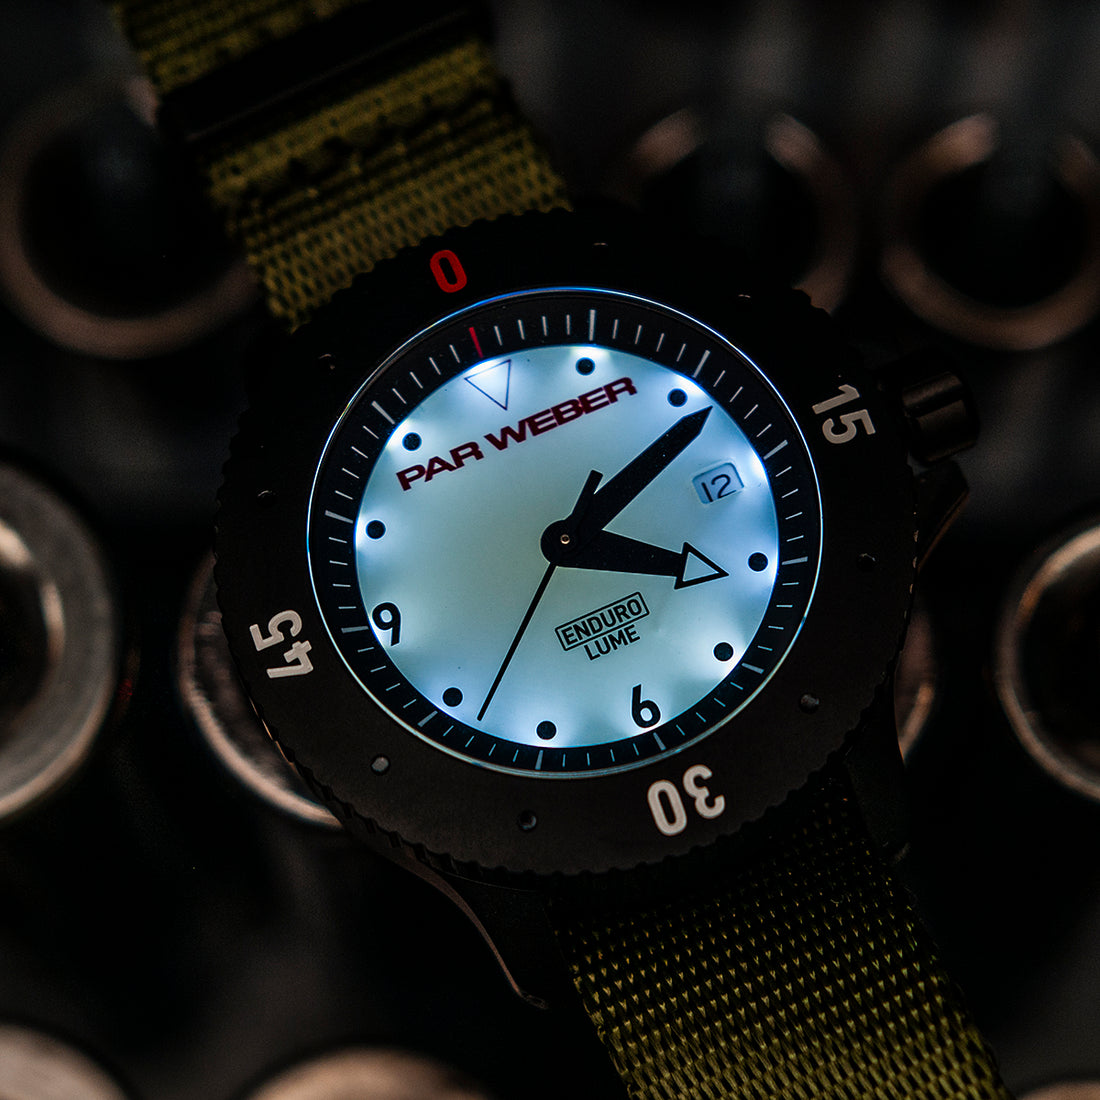 Par Weber Coefficient Watch Review - True American Innovation in the Watch Industry